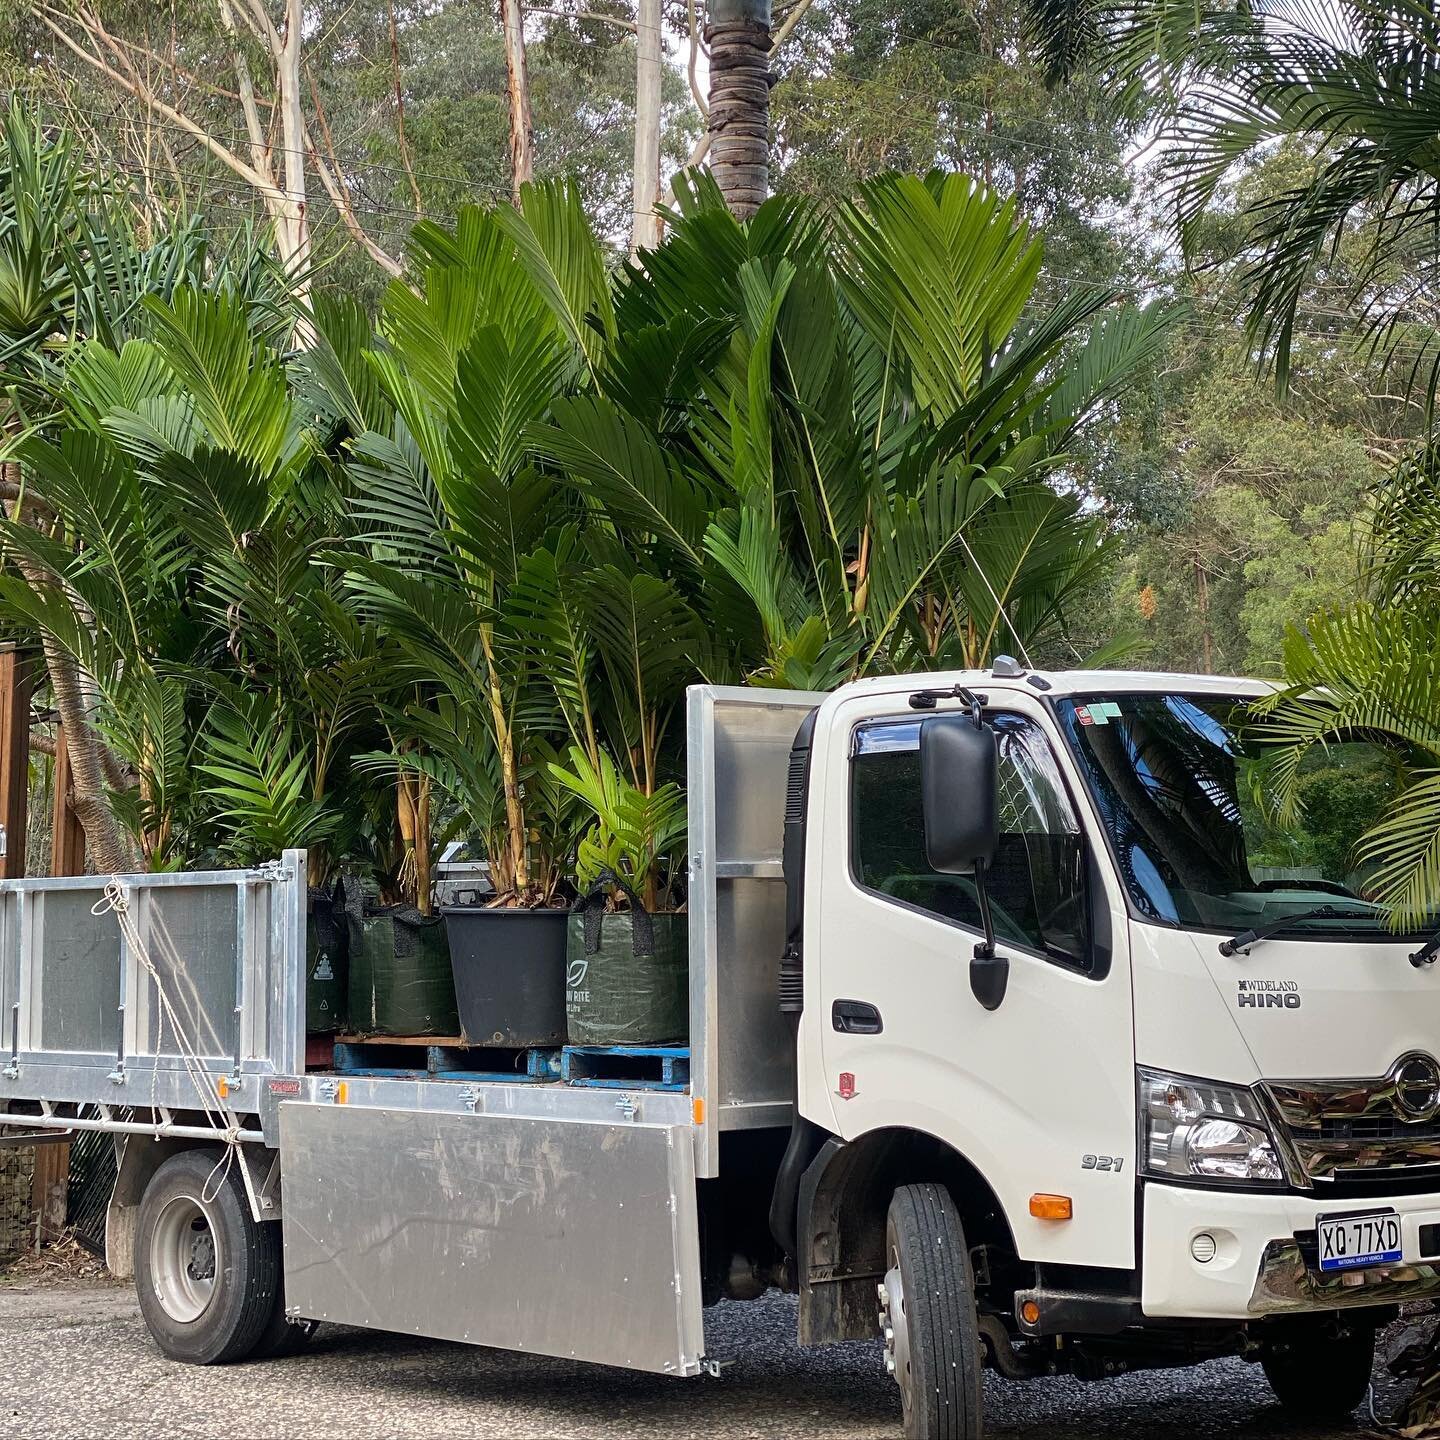 The new truck feels were worth the wait! So are these Ivory Cane Palms in 100lt we have put years into growing for instant high-end screening.

'Pinanga Coronta' ~ Striking clumping palm with elegant upright cream-coloured trunks. Perfect for mass pl